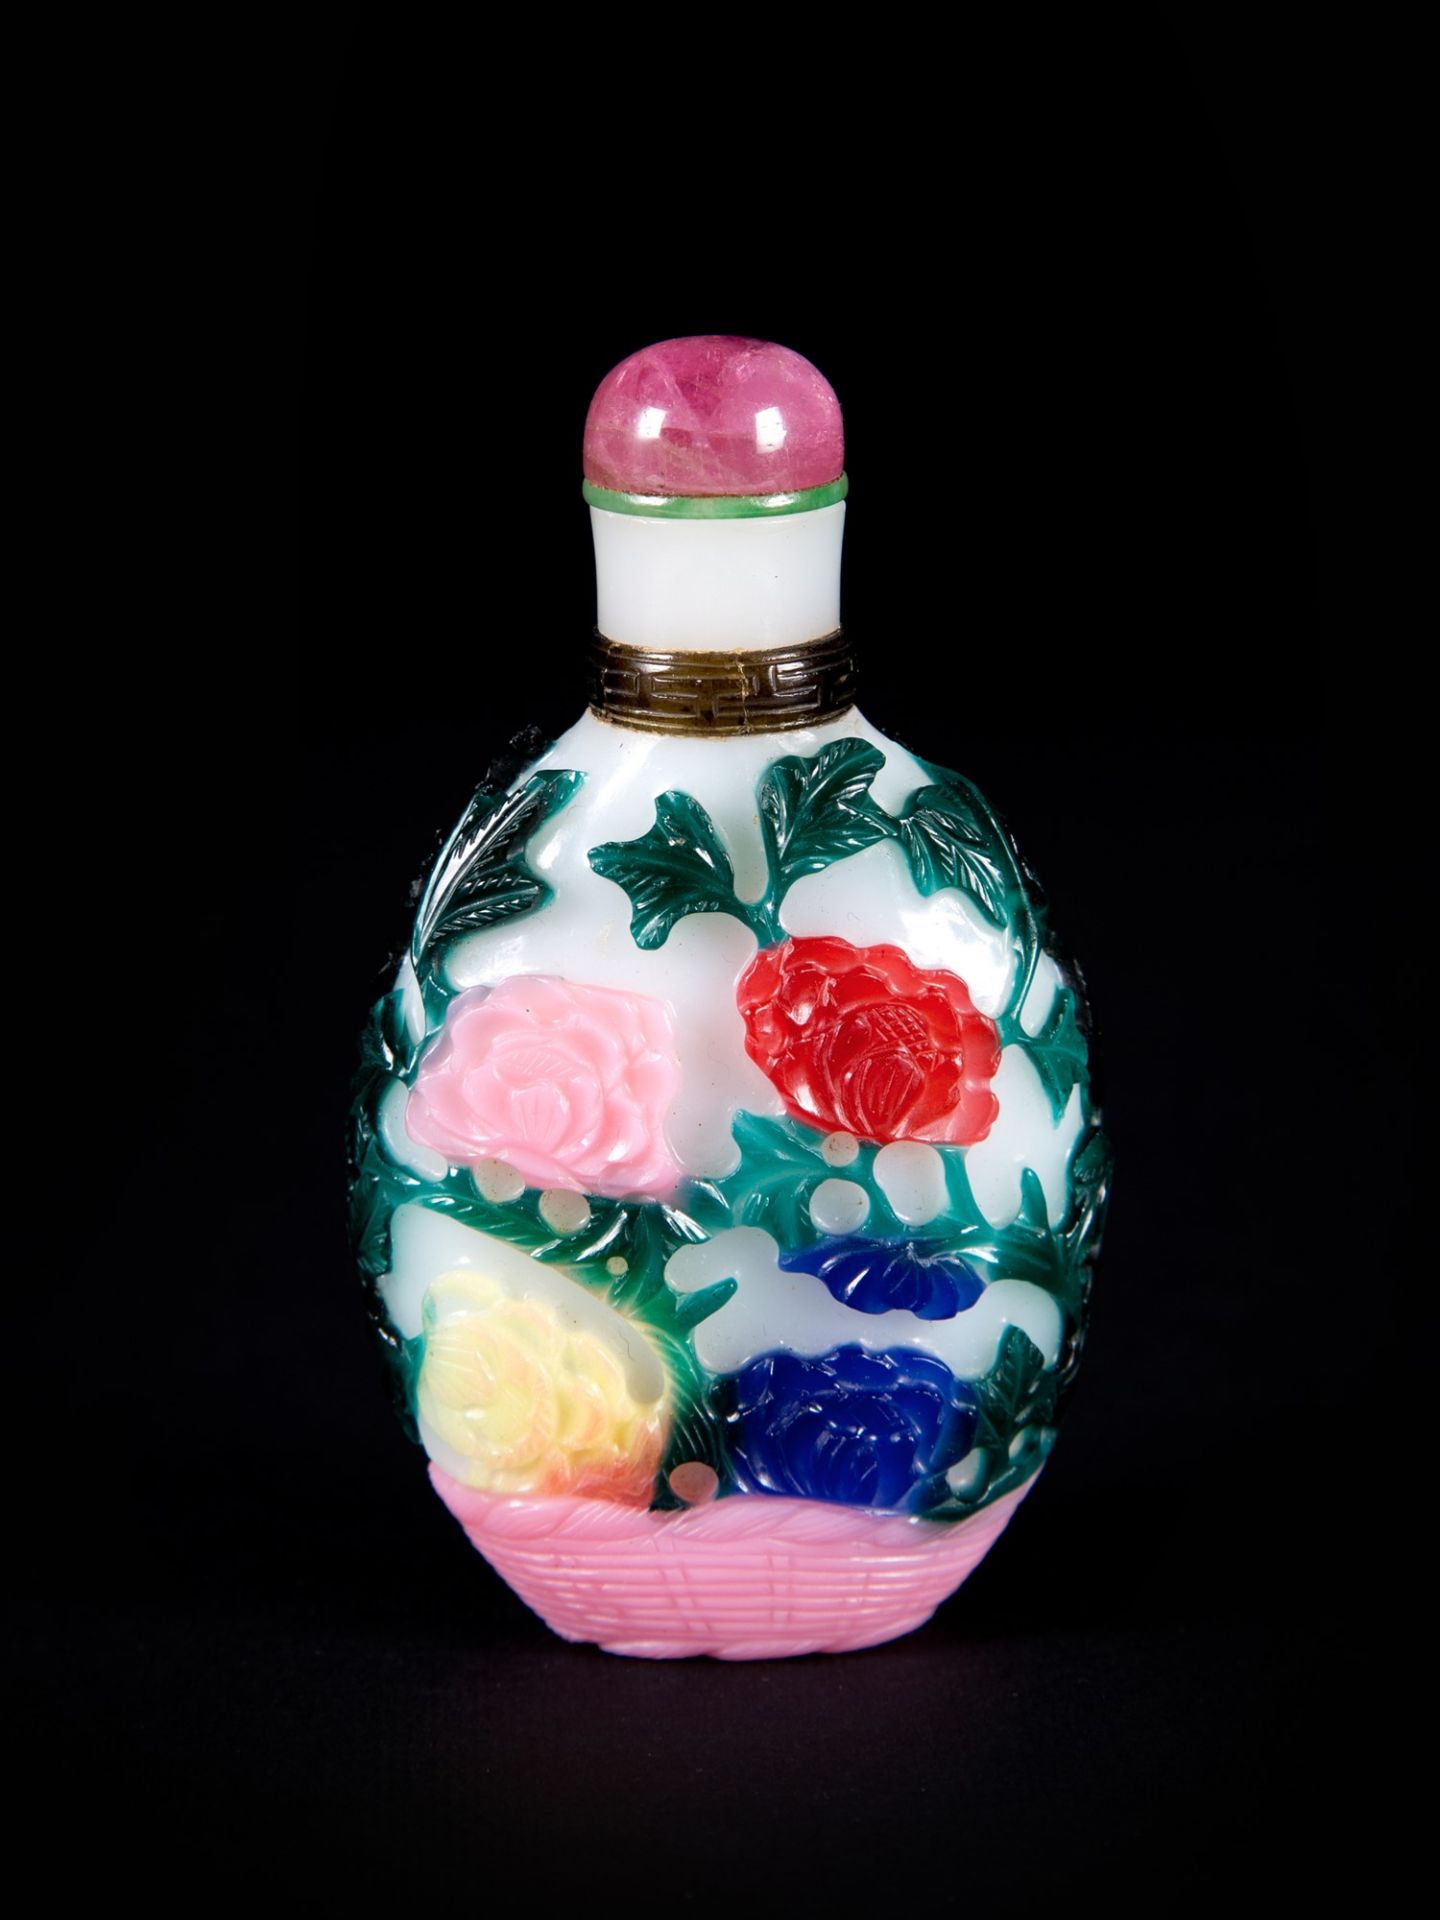 A RARE SEVEN COLOUR GLASS OVERLAY SNUFF BOTTLE h. 8 cm - Image 2 of 5